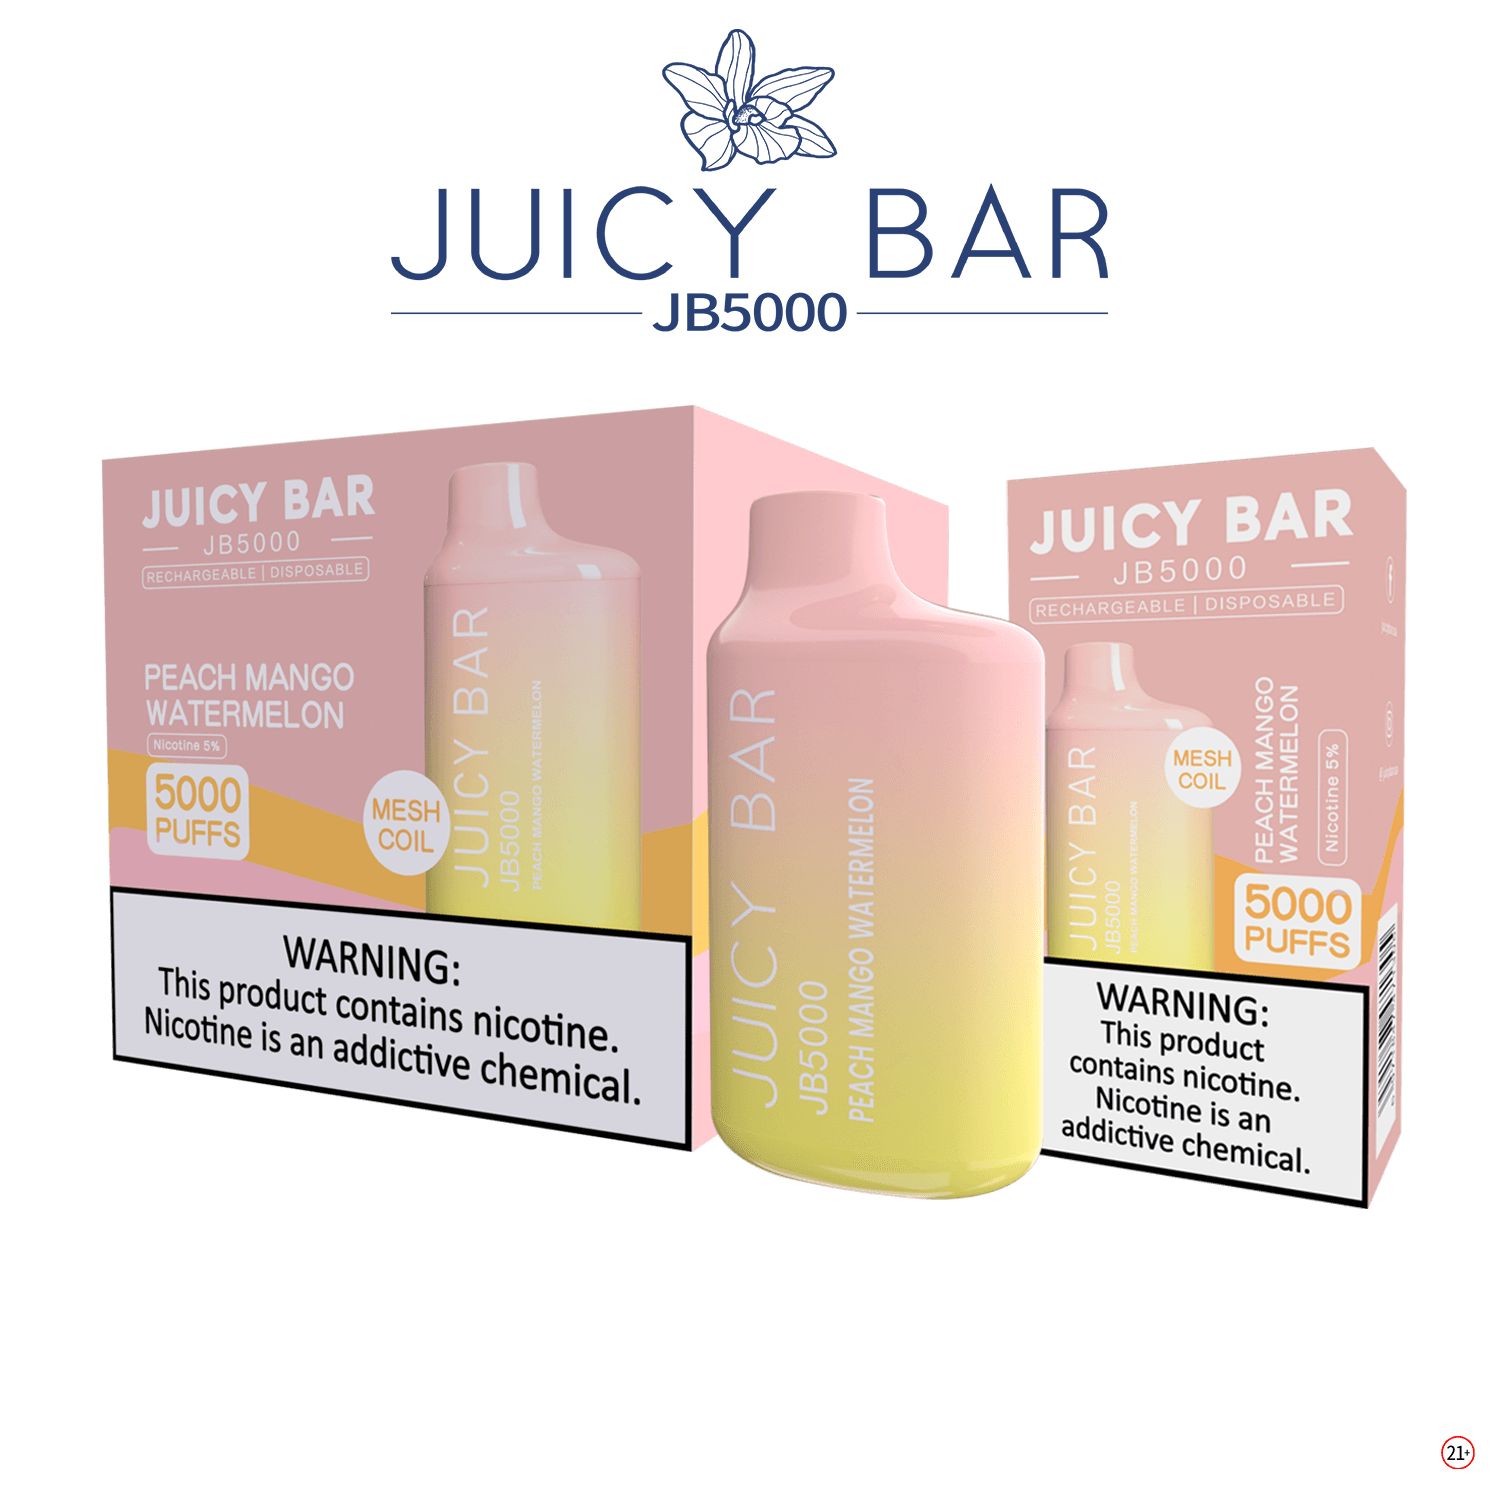 JUICY BAR  JB5000 puffs  Disposable Devices - Storm Chaser